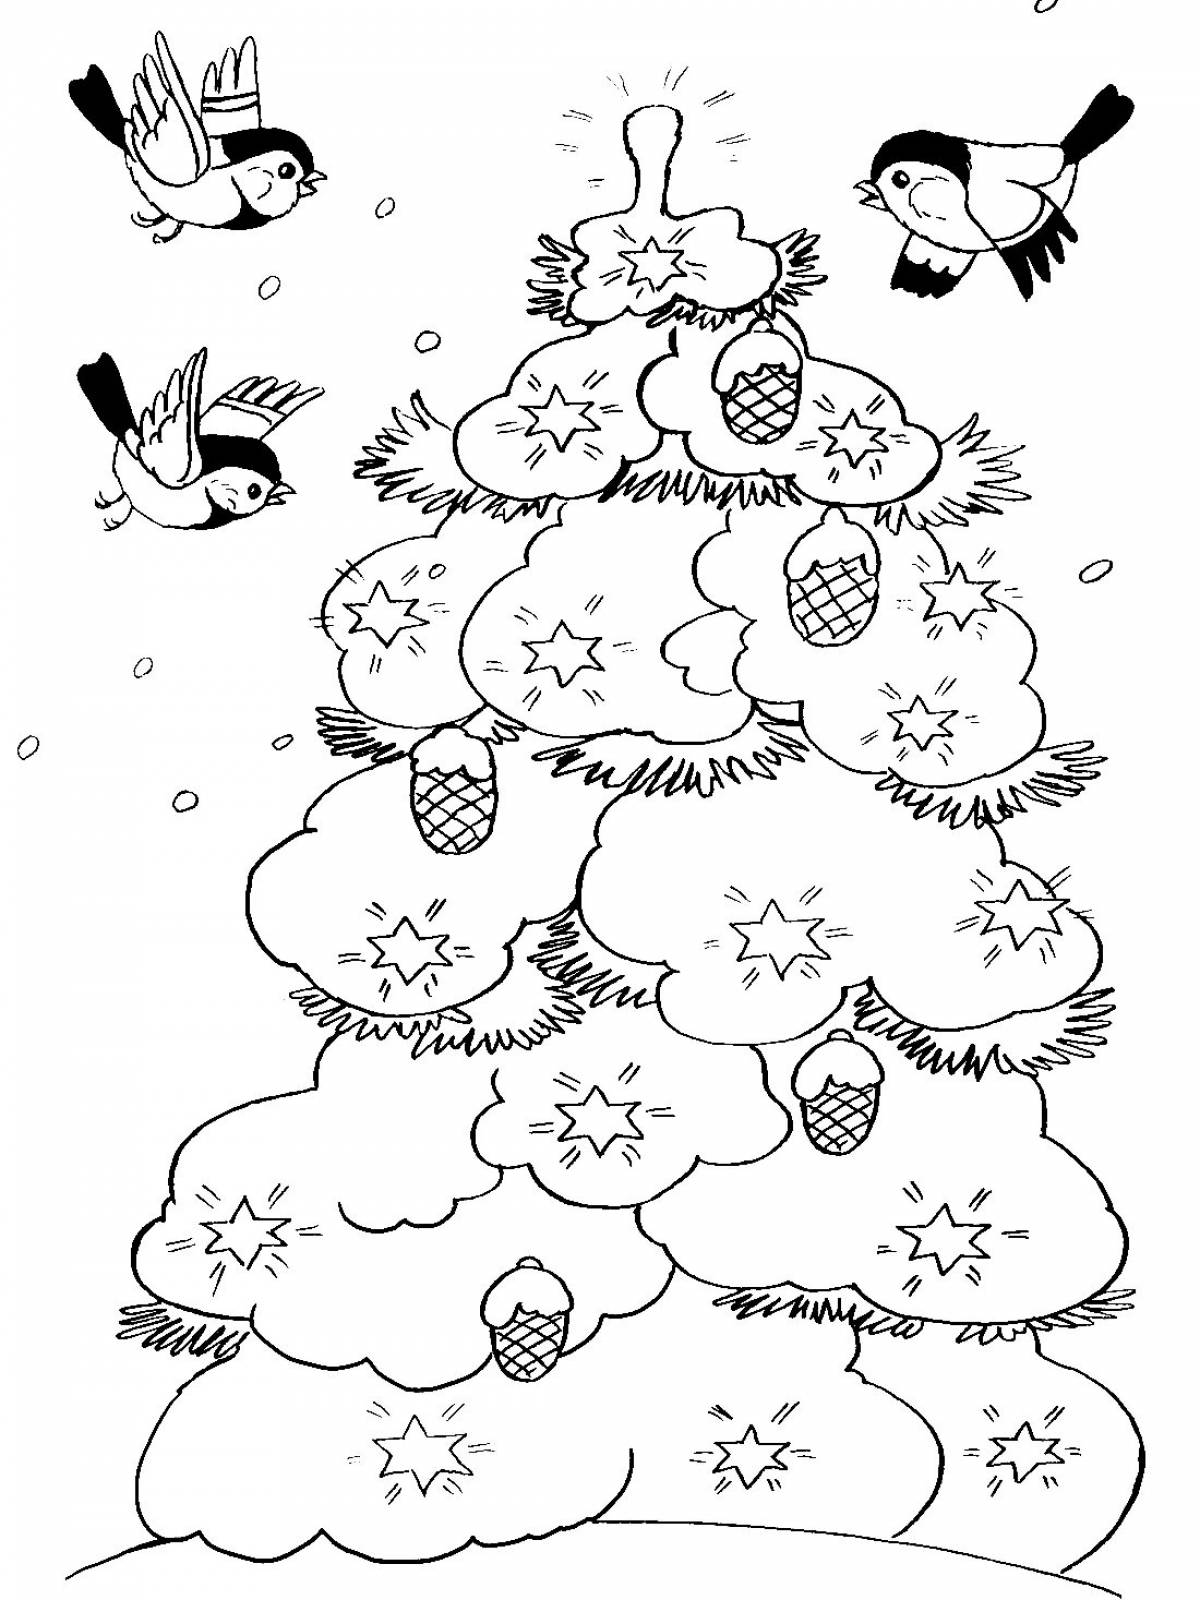 The shimmering forest grew a Christmas tree coloring book